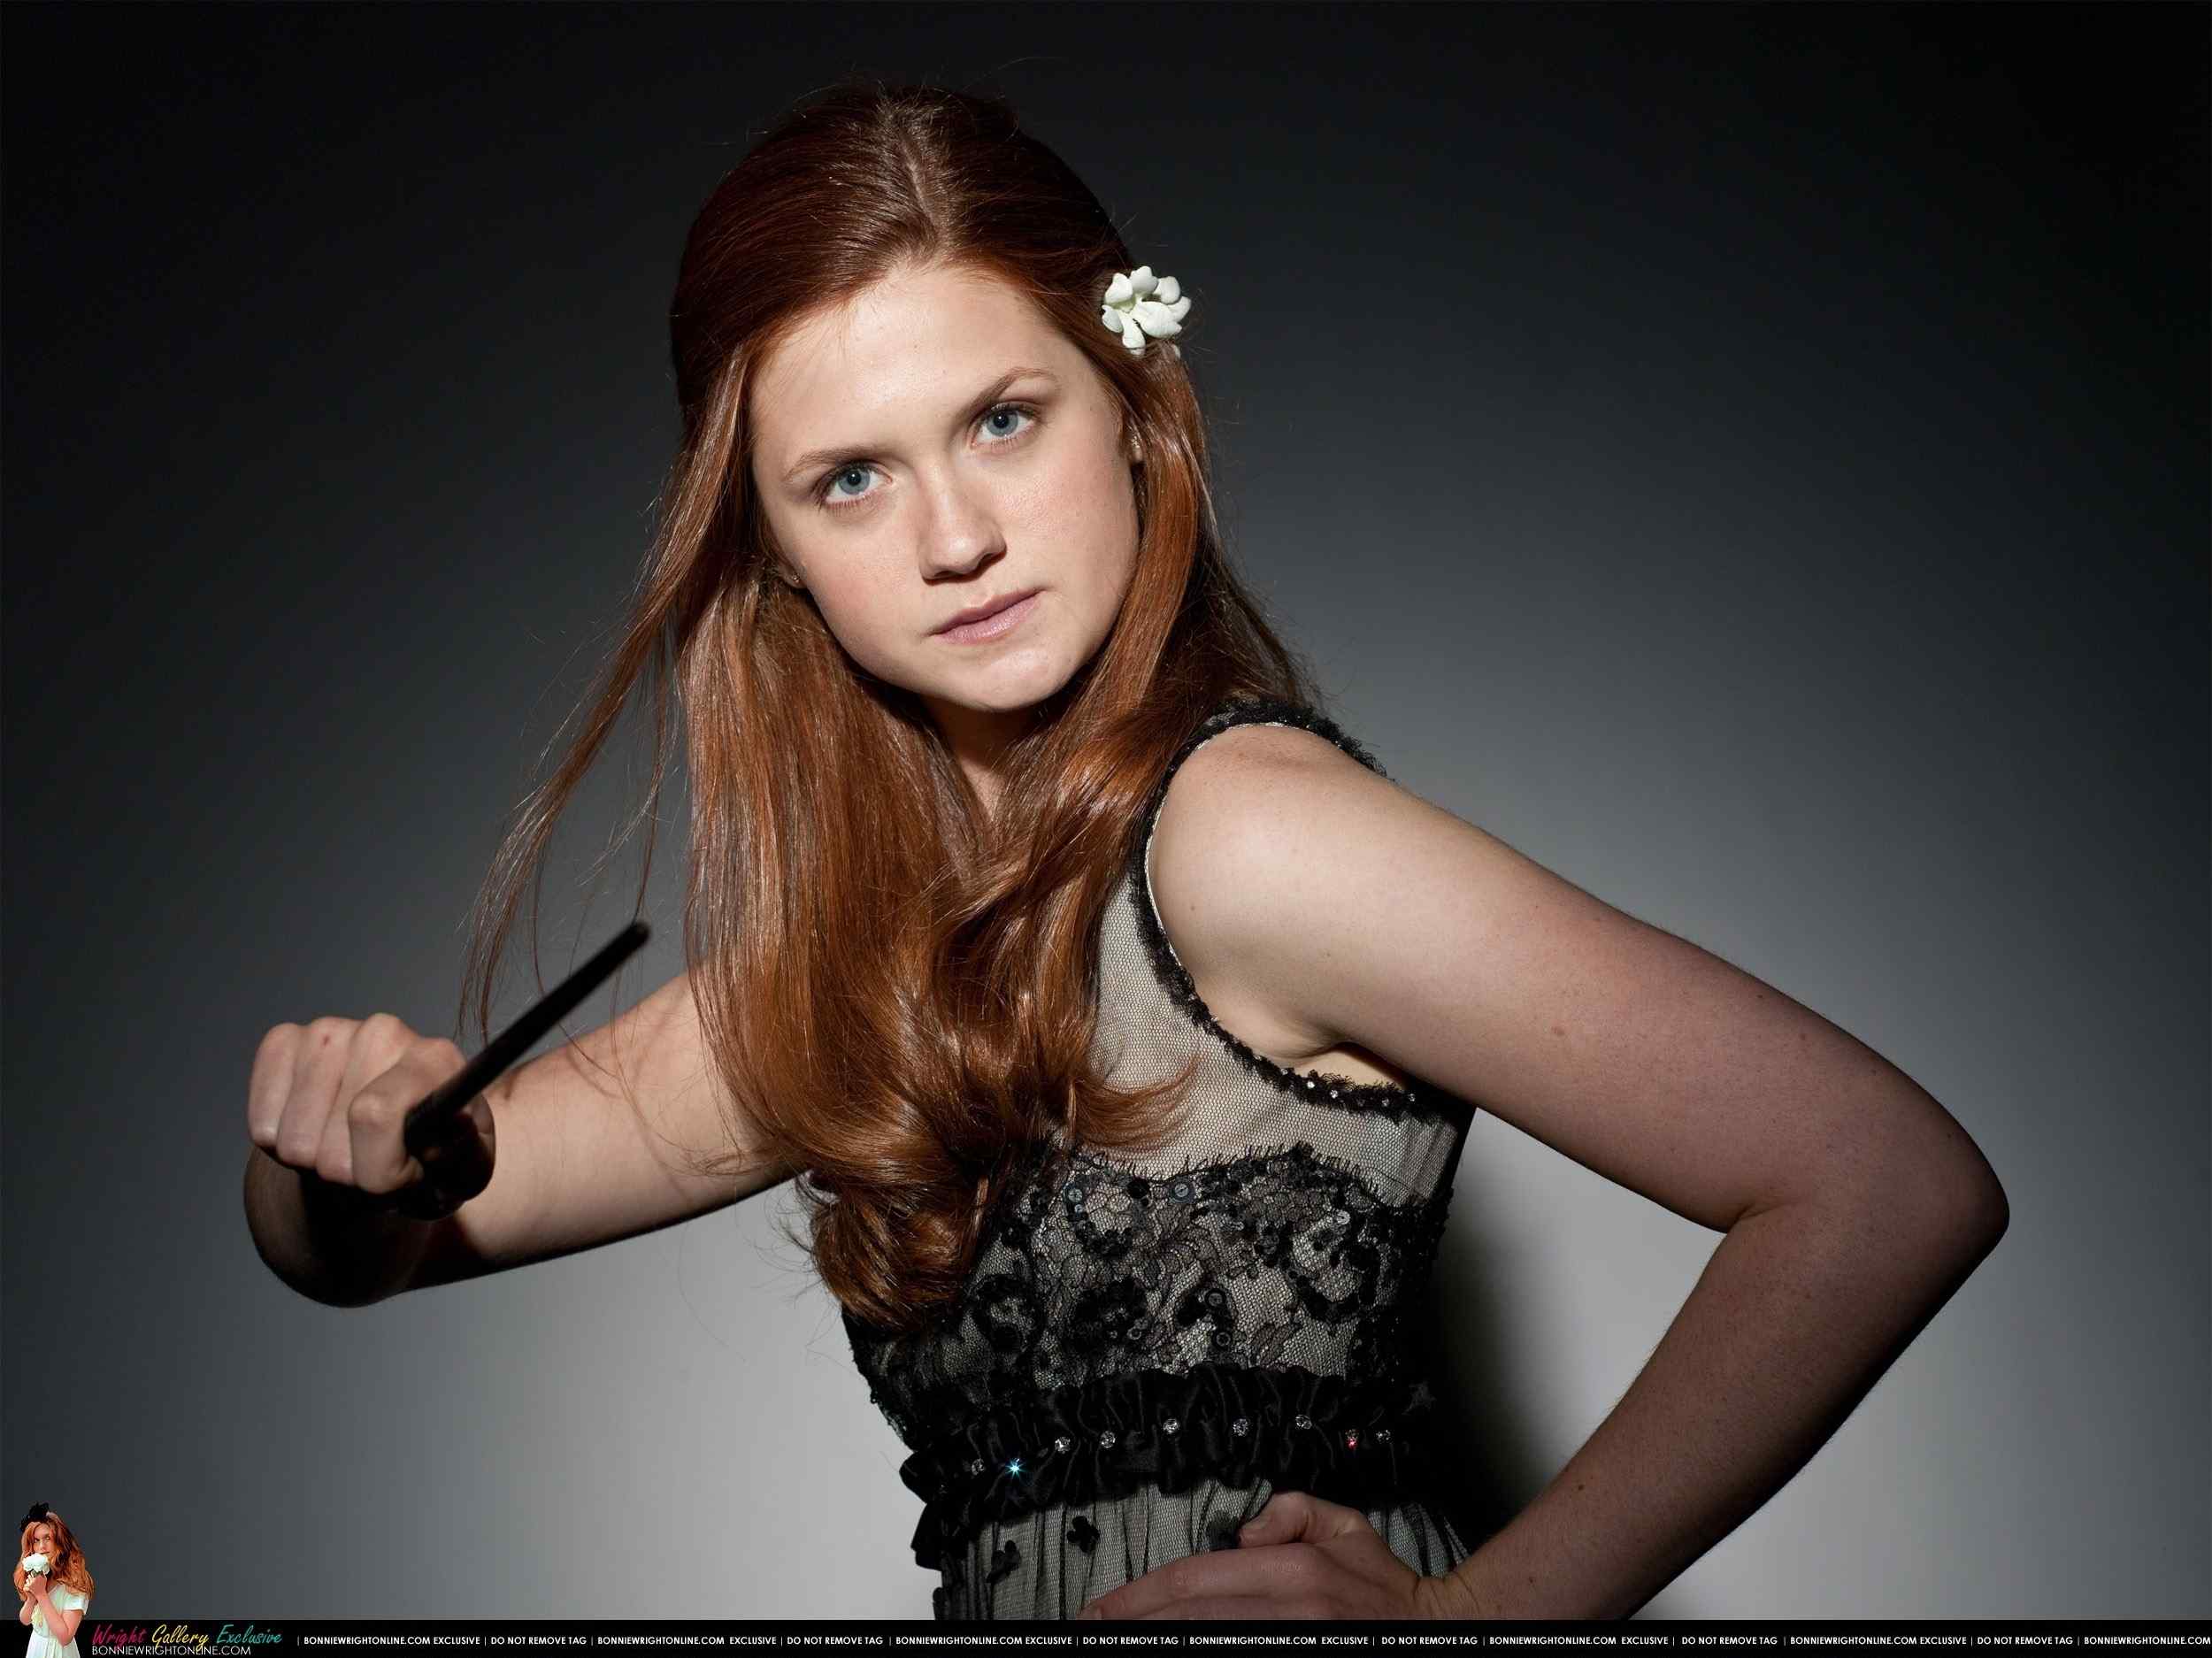 60+ Sexy Bonnie Wright Boobs Pictures Are Going To Make You Want Her Badly 33